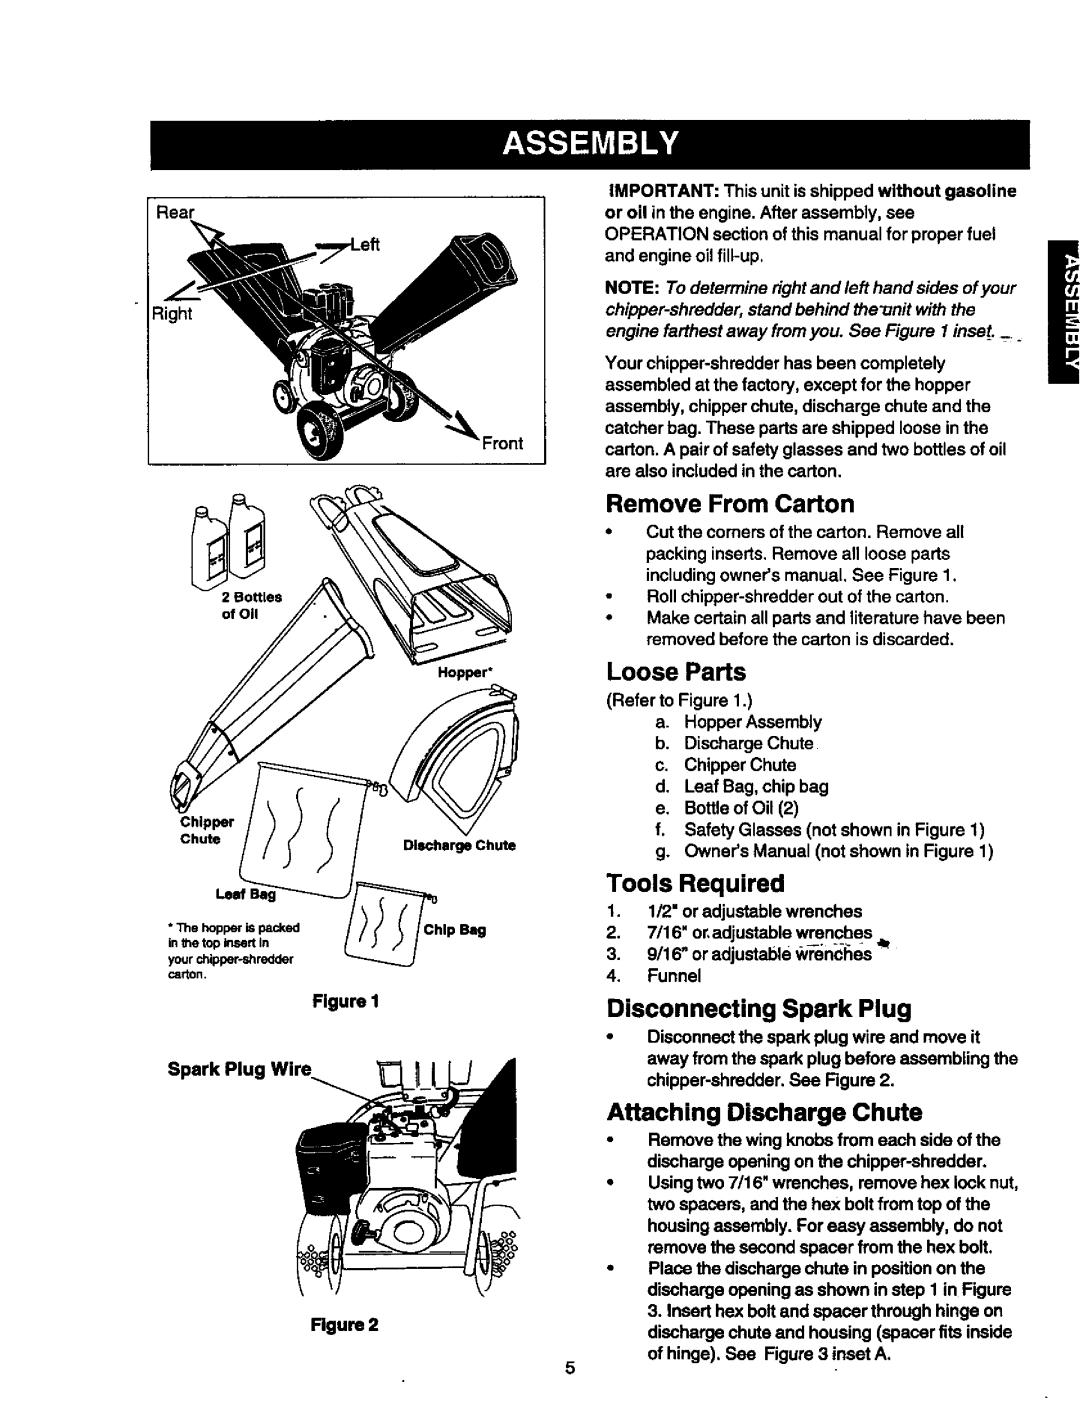 Craftsman 247.775890 Remove From Carton, Loose Parts, Tools Required, Disconnecting Spark Plug, Attaching Discharge Chute 